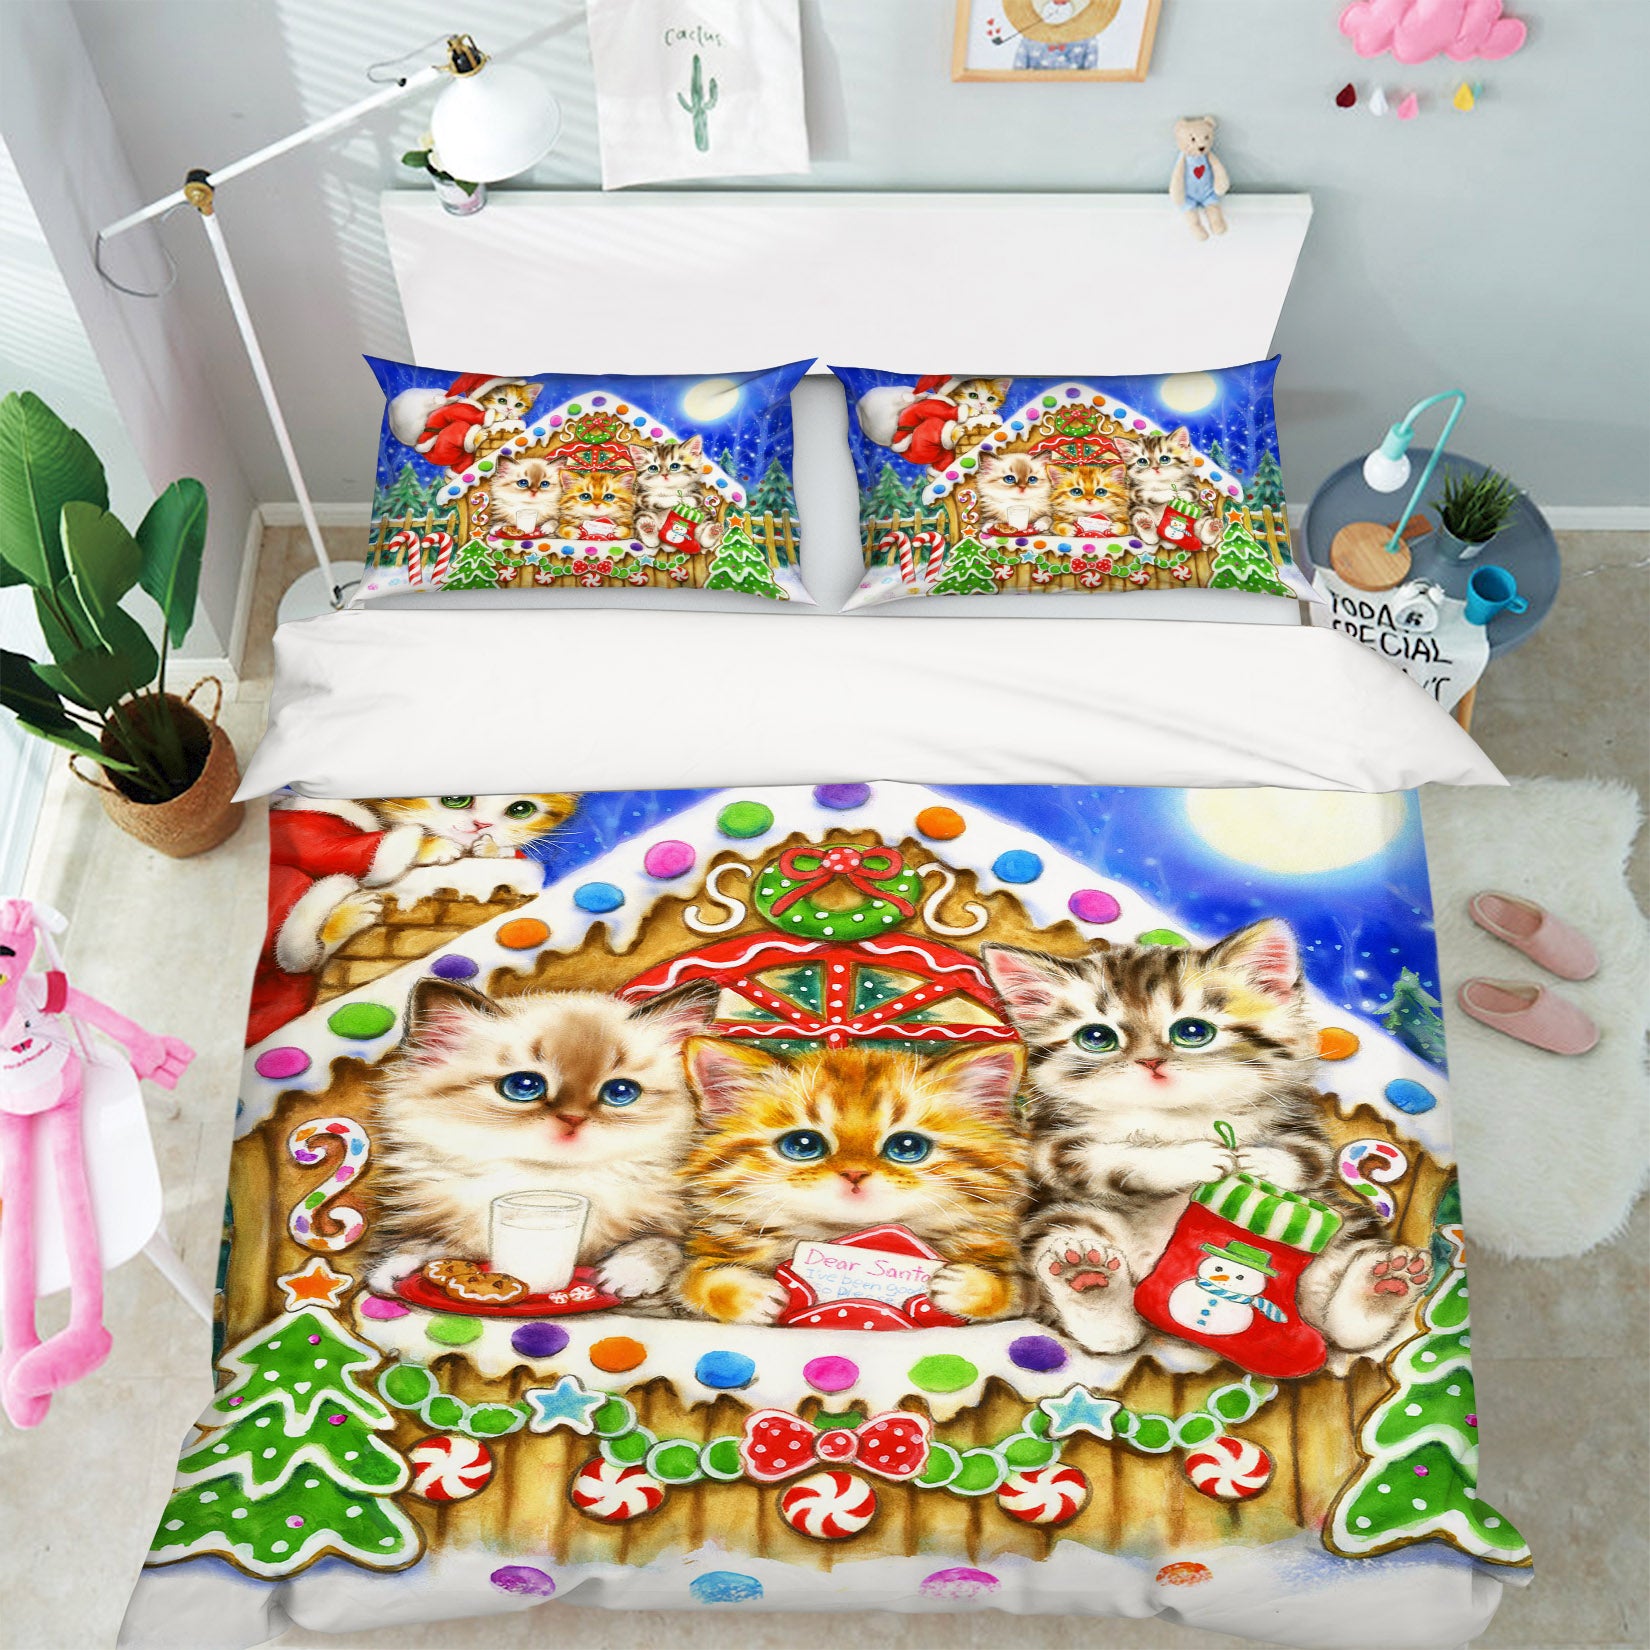 3D Christmas Cat House 5823 Kayomi Harai Bedding Bed Pillowcases Quilt Cover Duvet Cover